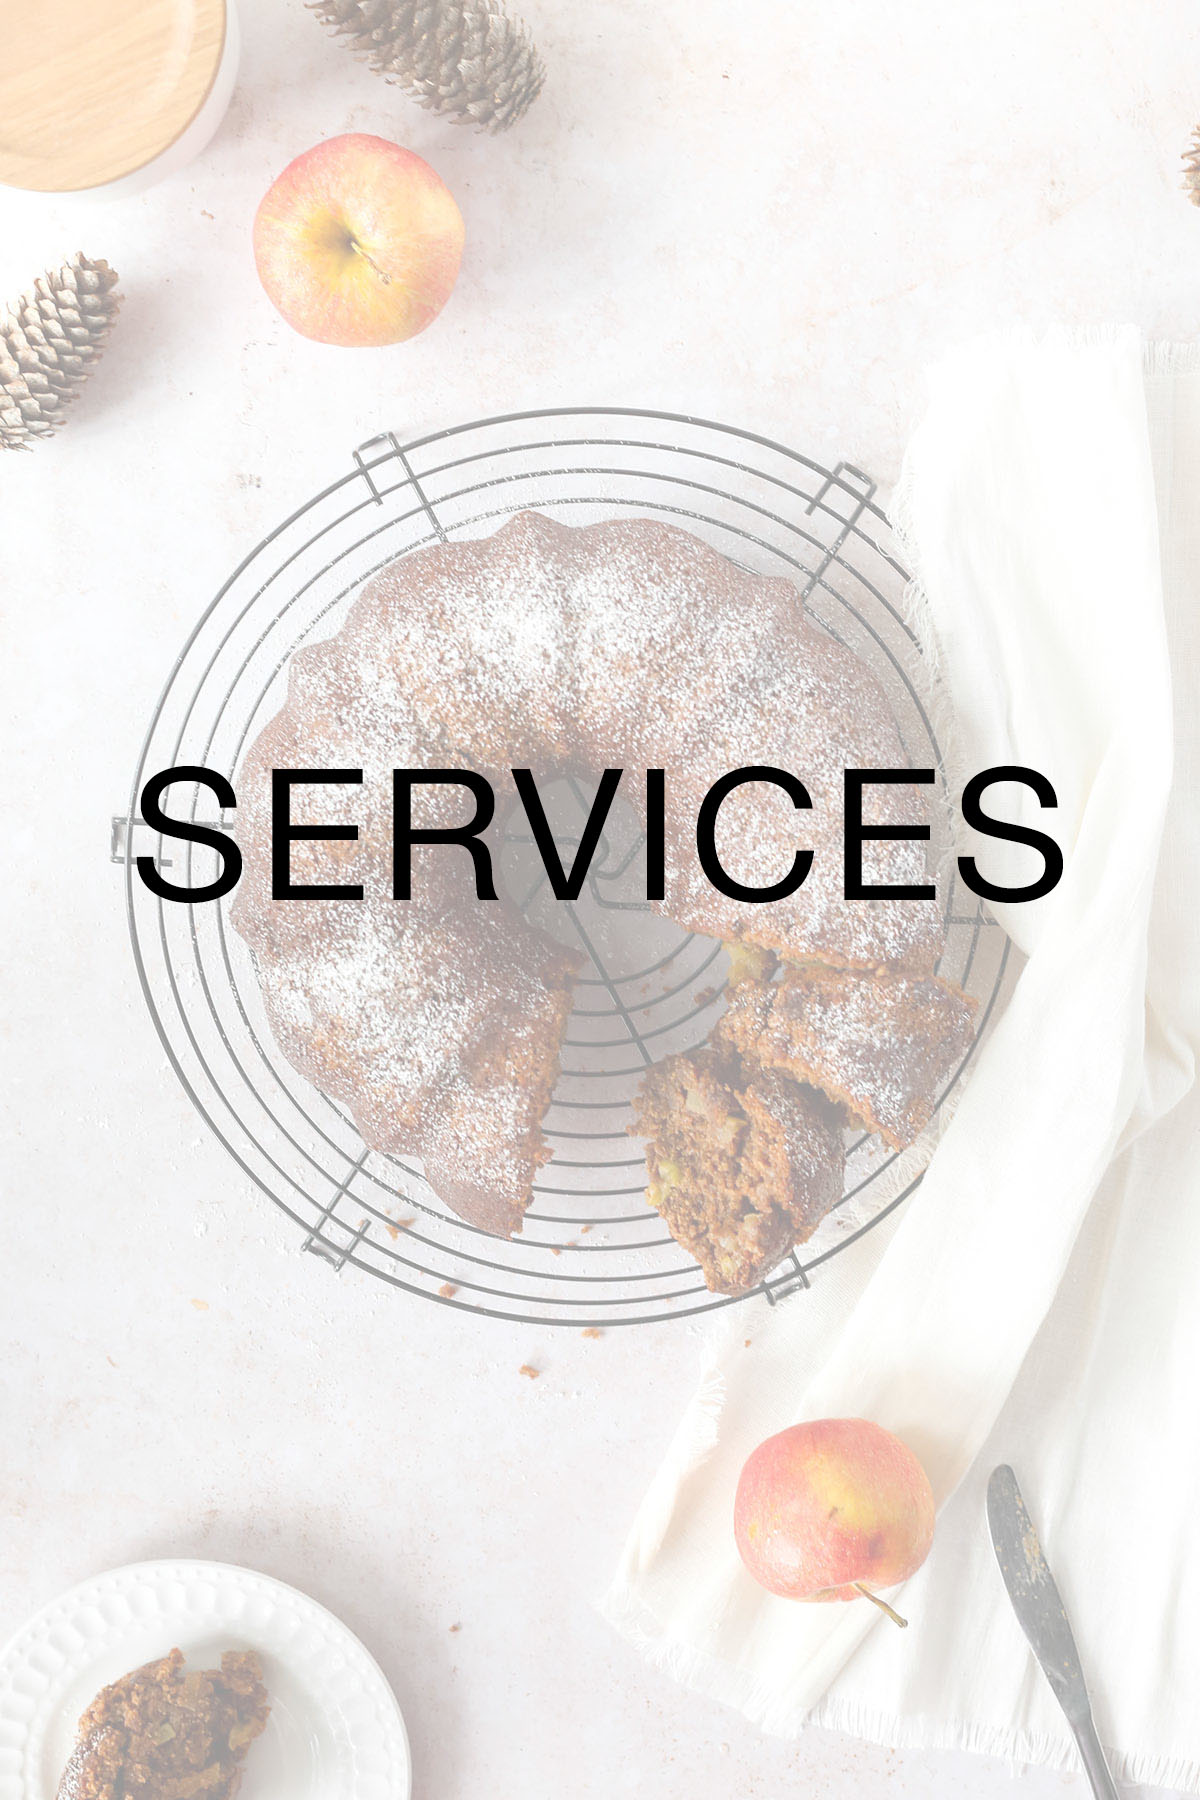 an easy to make vegan apple bundt cake with "services" text over the image.